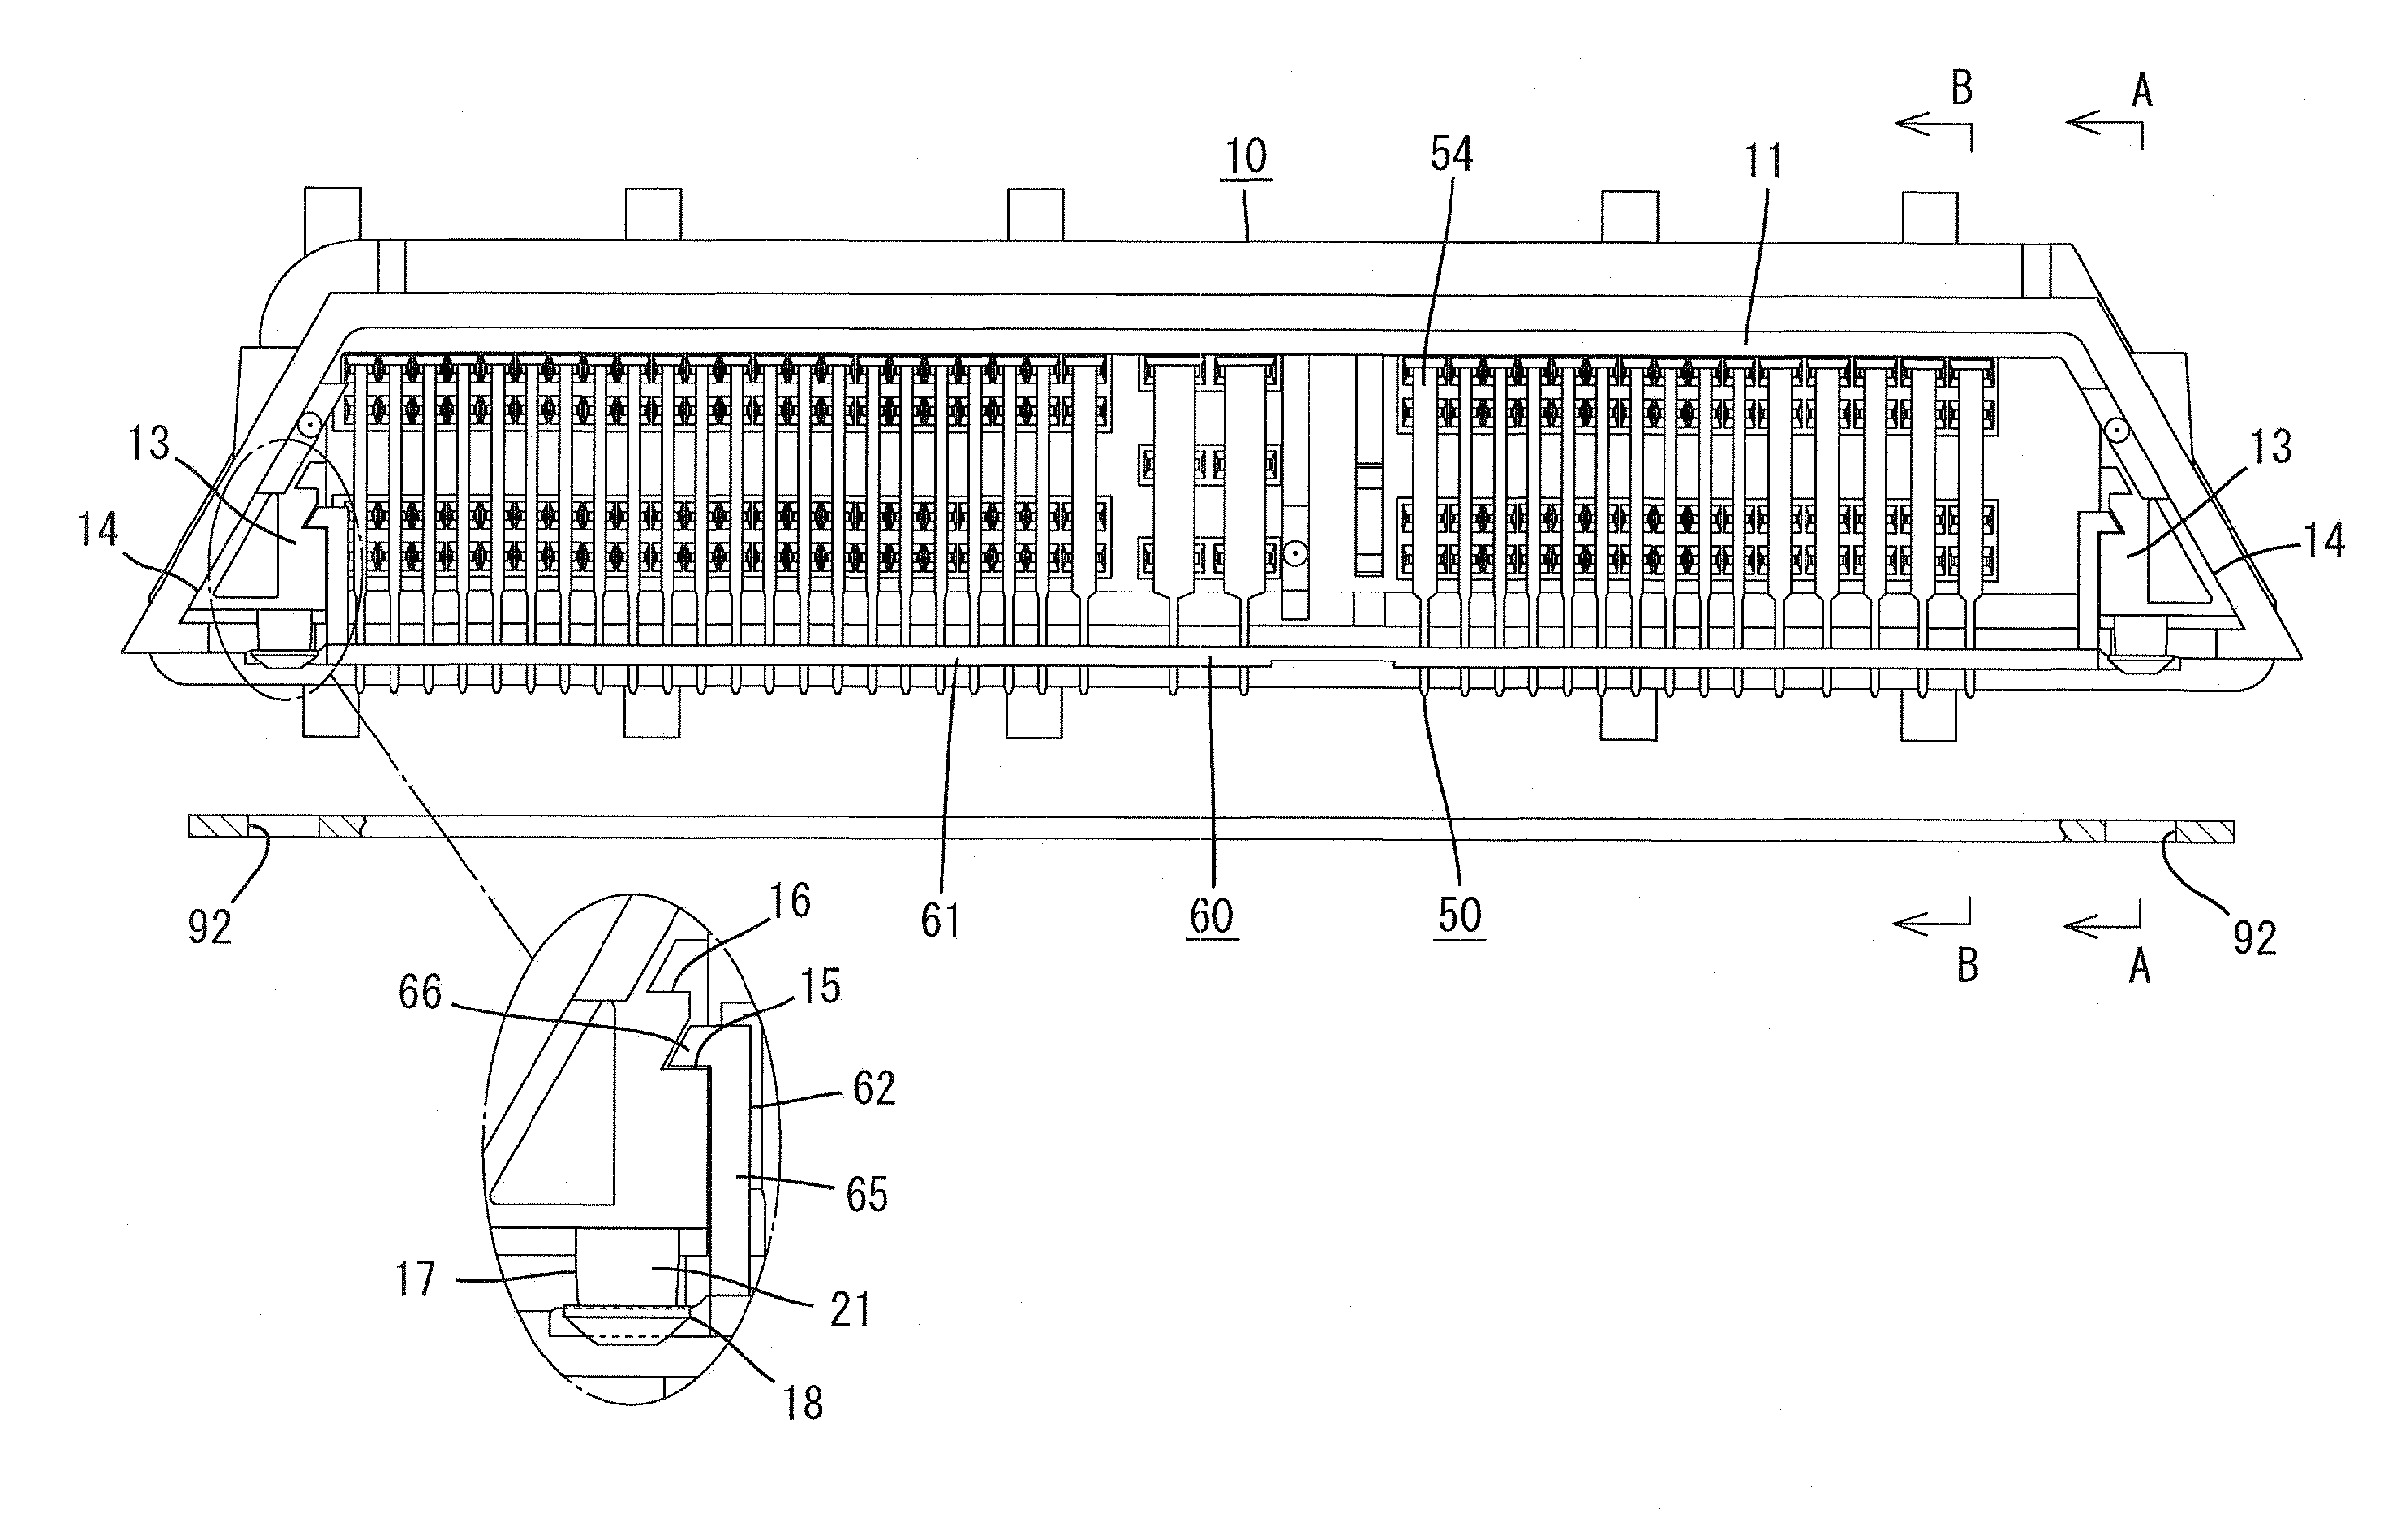 Board connector and method of mounting it